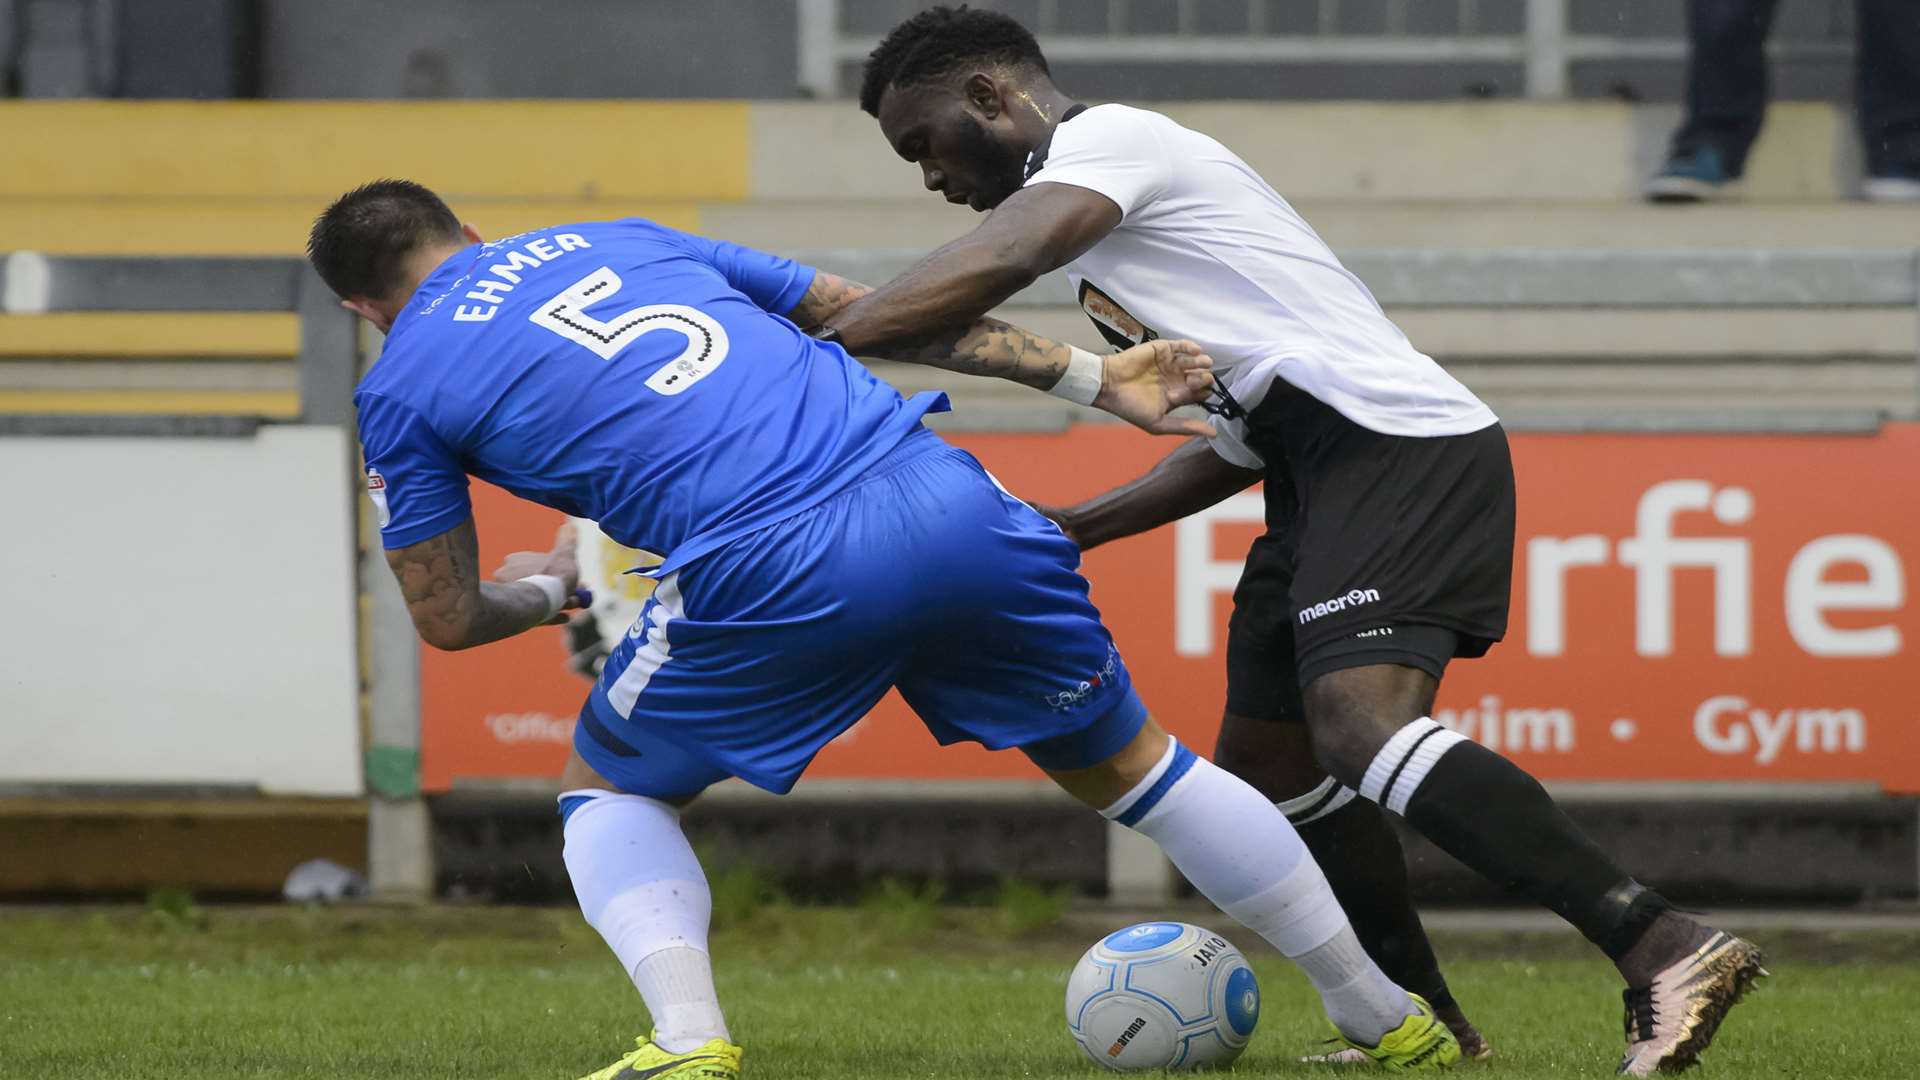 Warren Mfula has staked his claim for a contract at Dartford Picture: Andy Payton